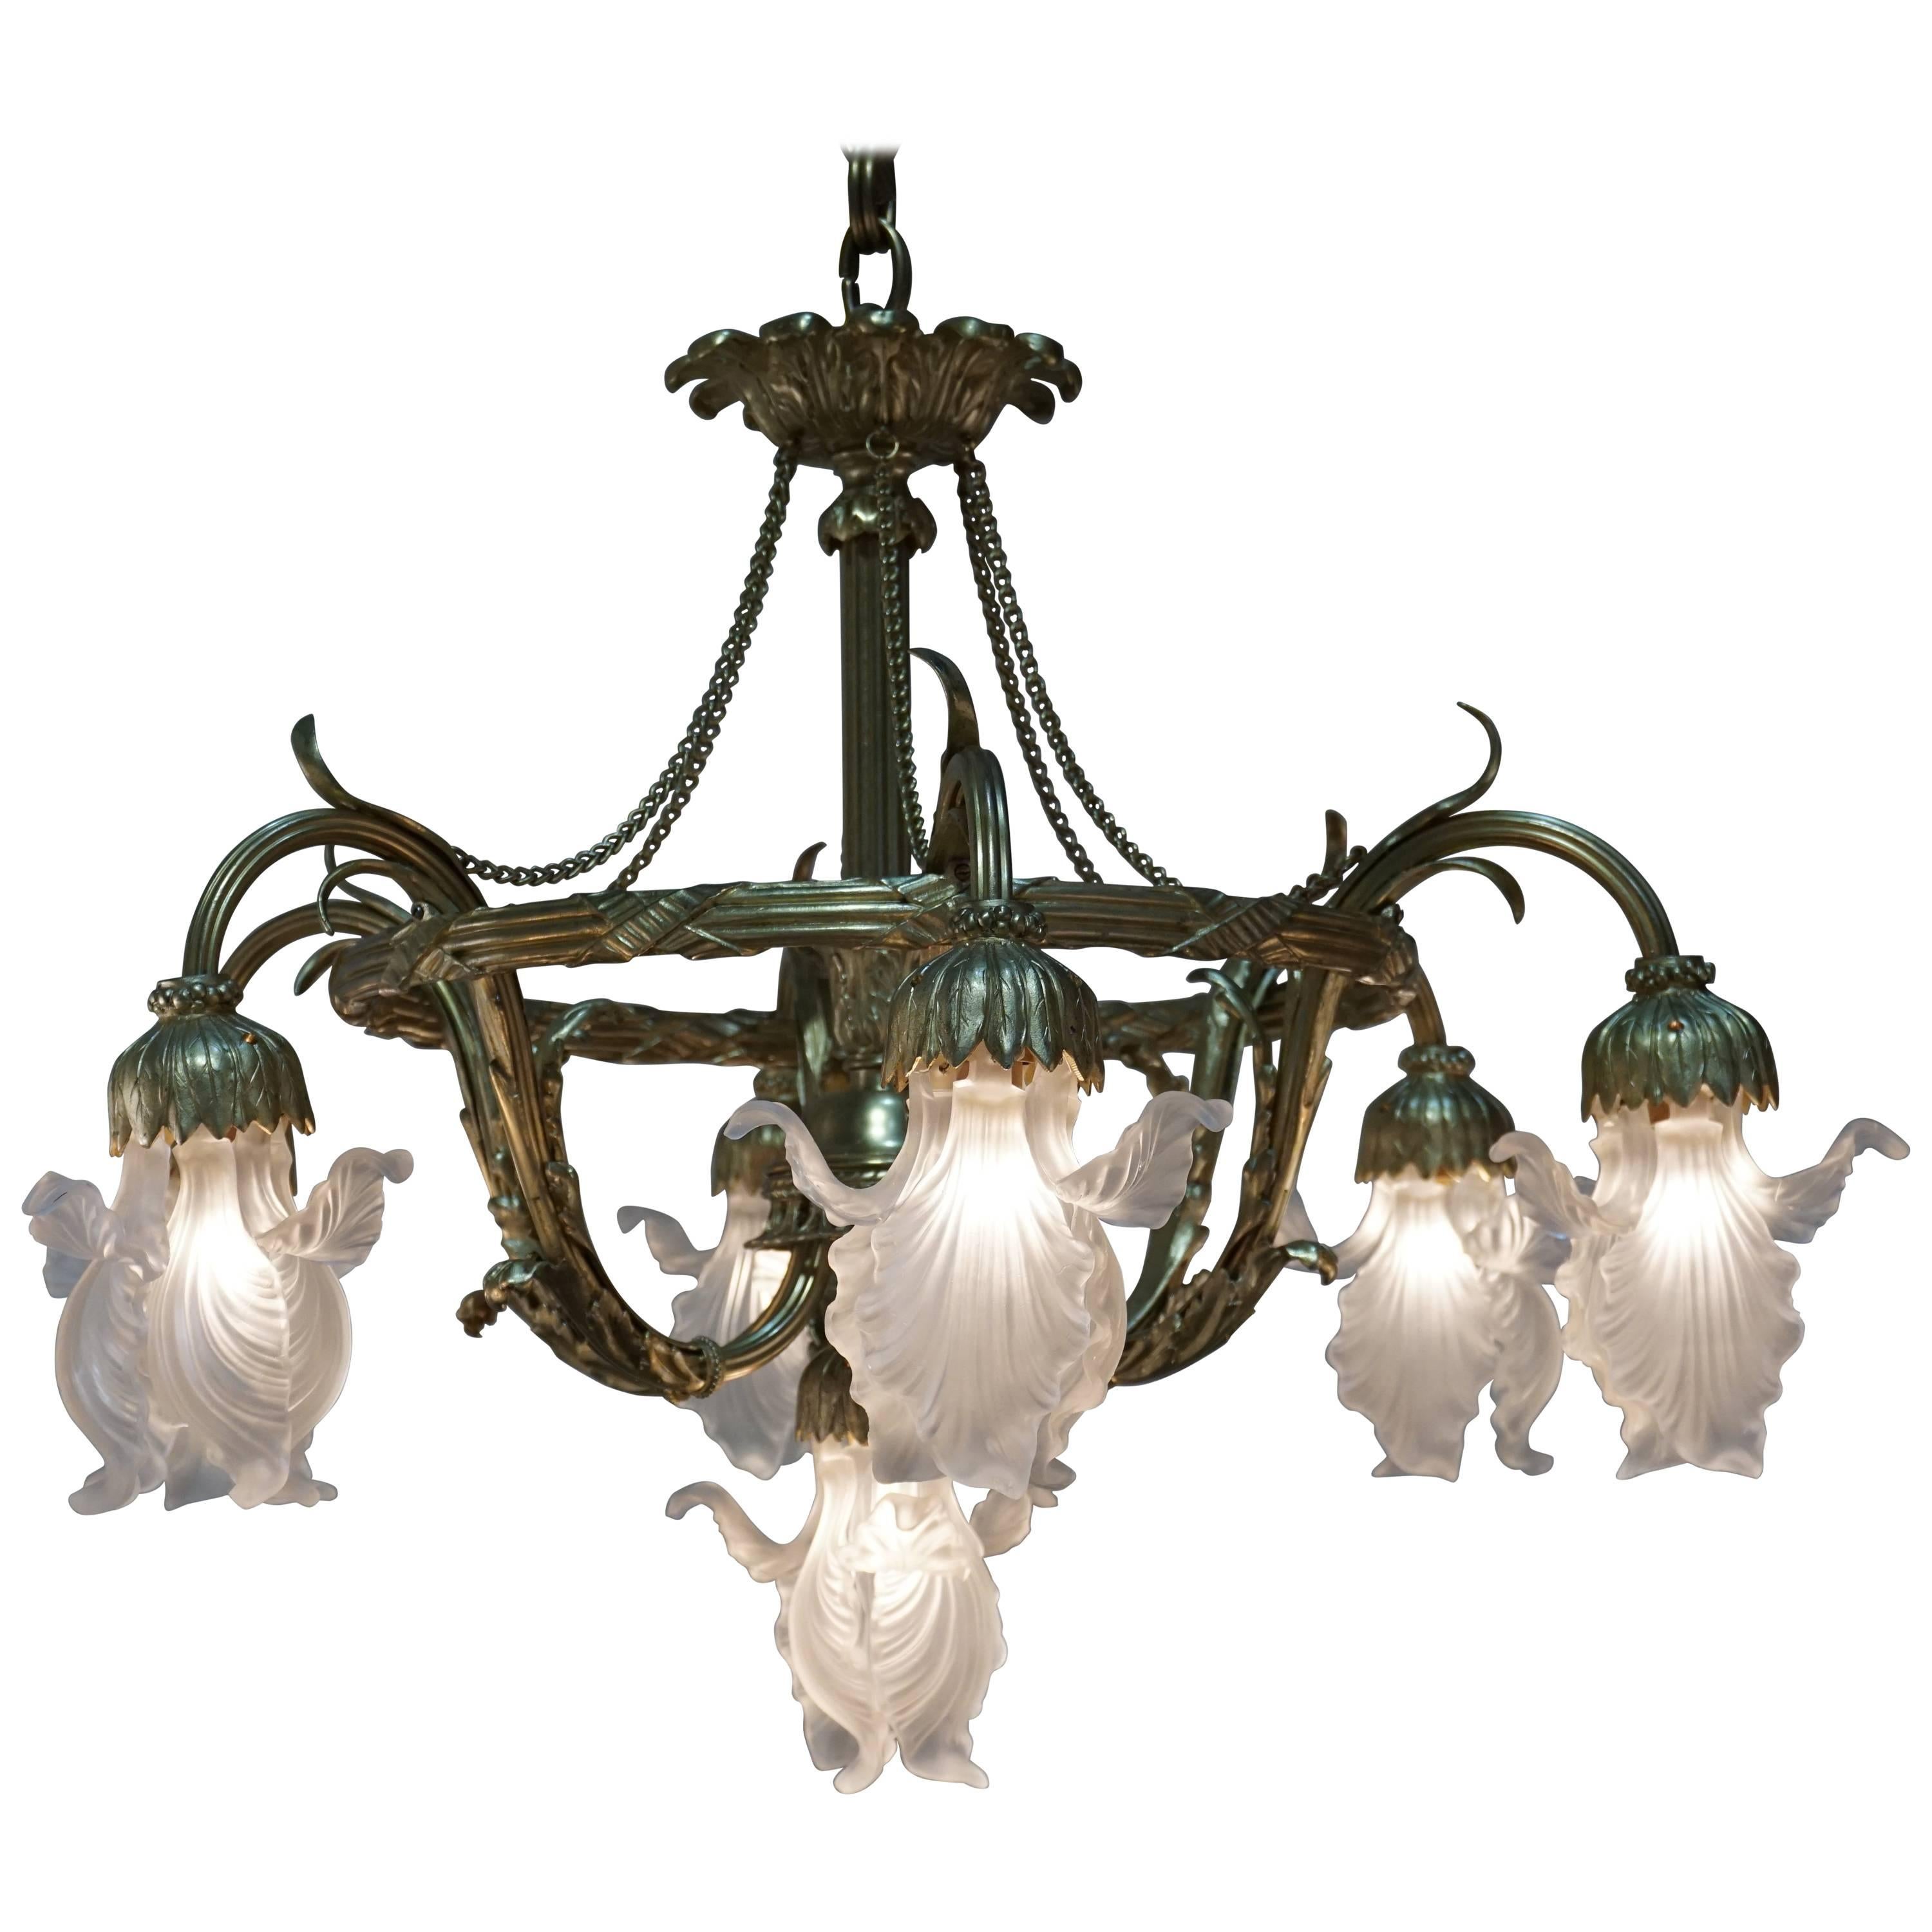 French Art Nouveau Bronze and Glass Chandelier